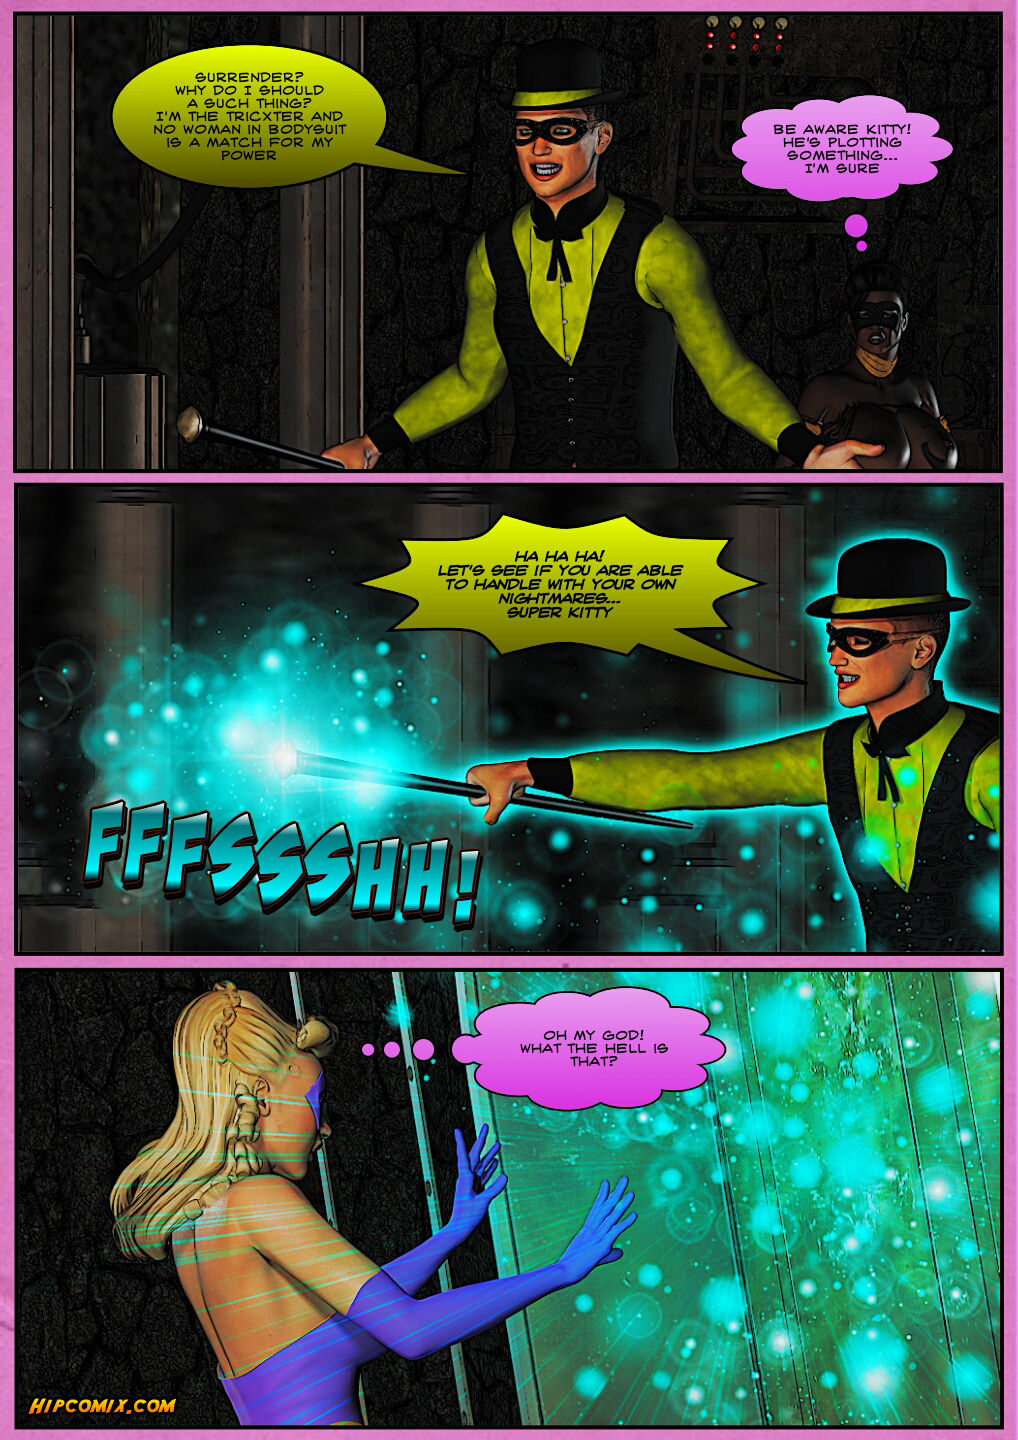 Purple Kitty - Issue 2 - HipComix page 10